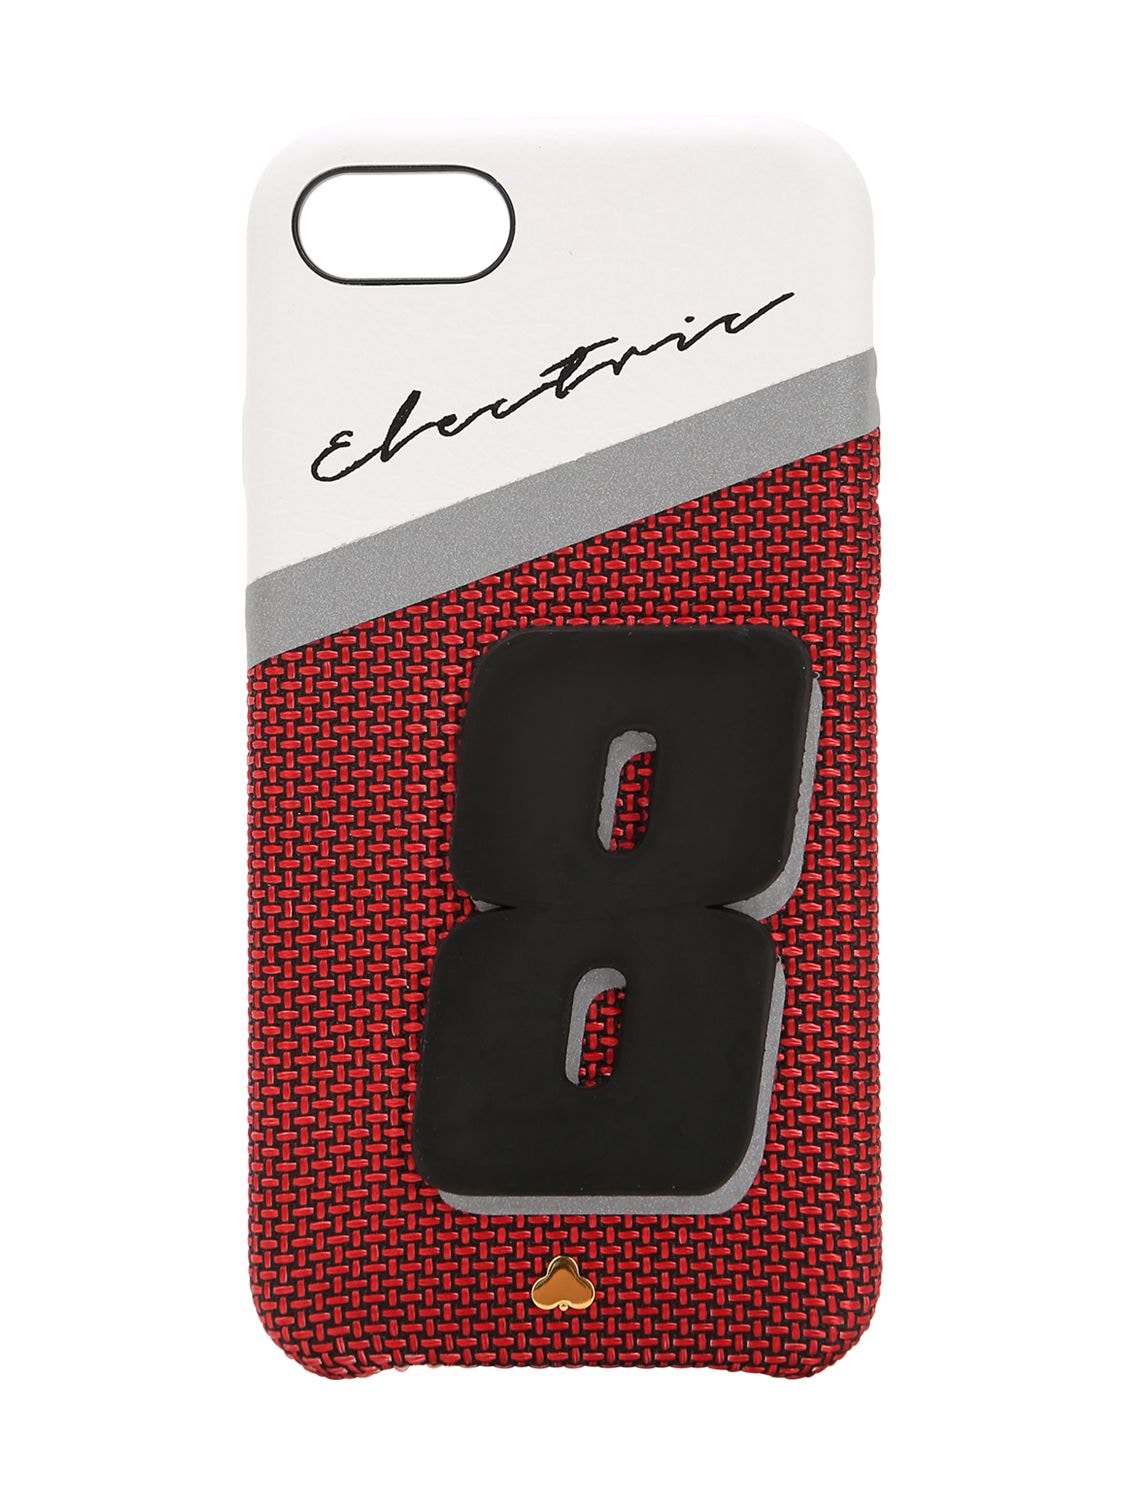 Chaos Electric 8 Leather Iphone 7/8 Cover In Red